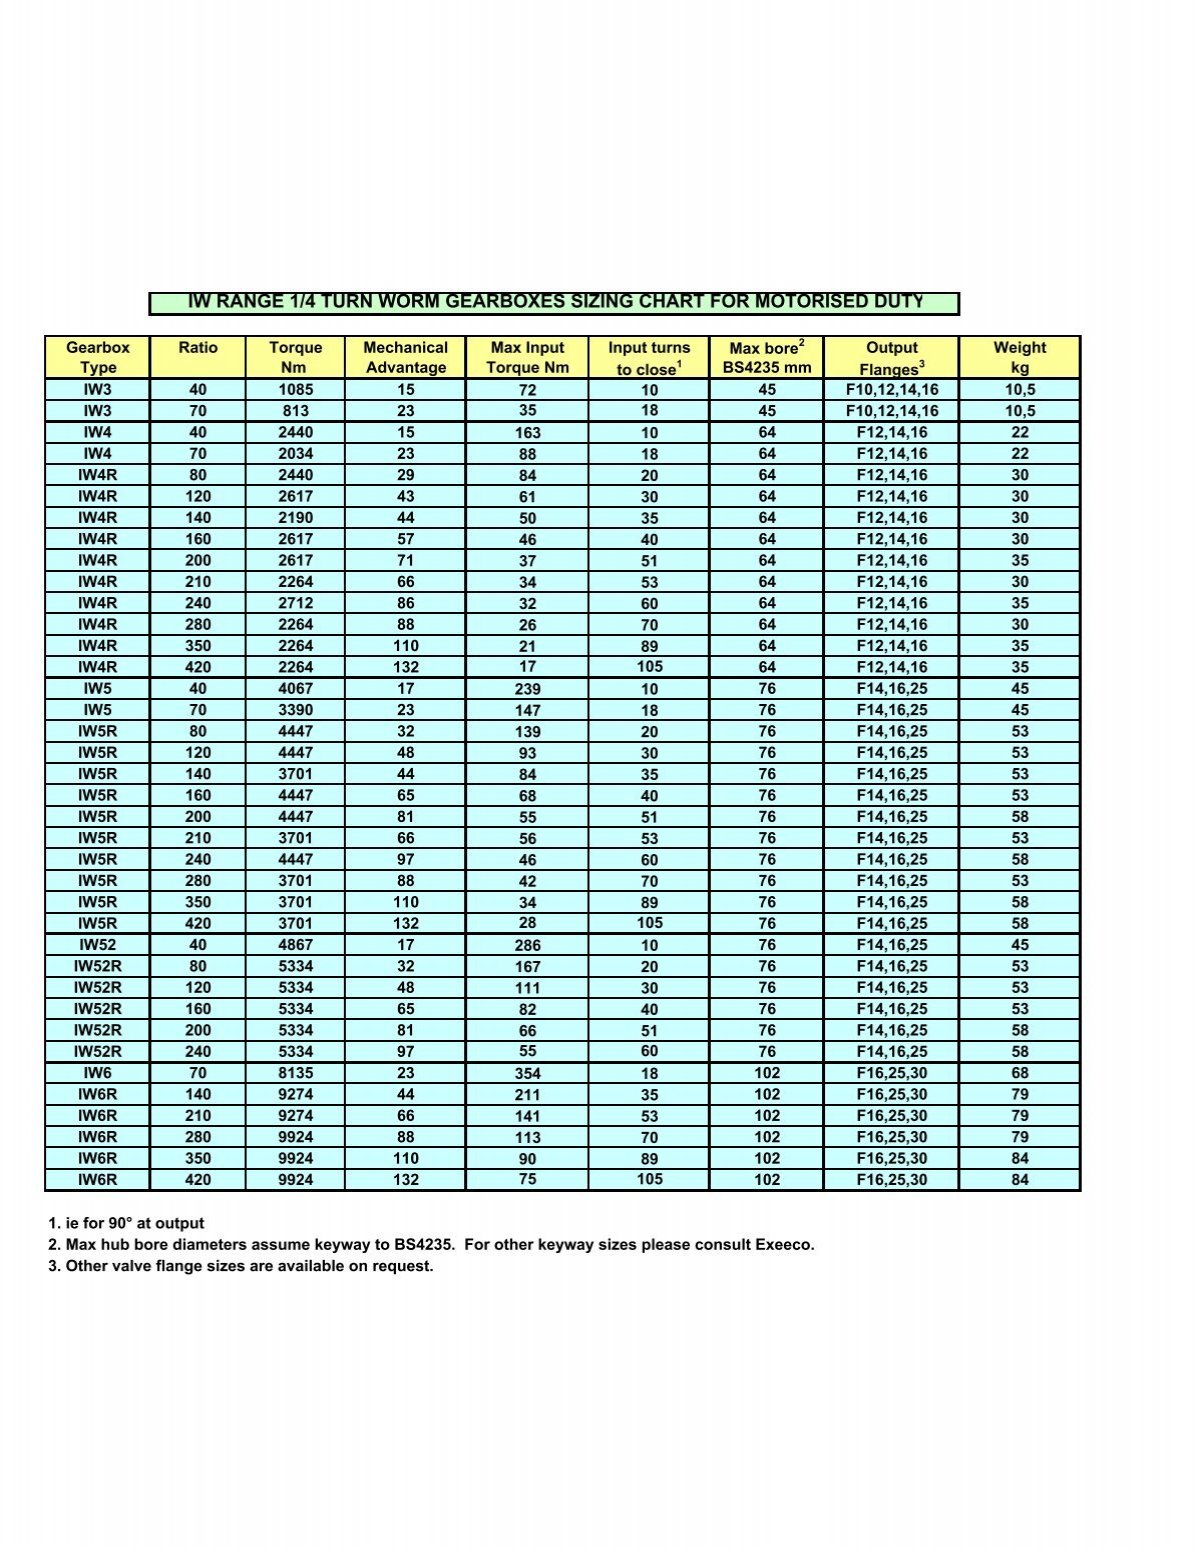 IW RANGE 1/4 TURN WORM GEARBOXES SIZING CHART FOR MOTORISED DUTY